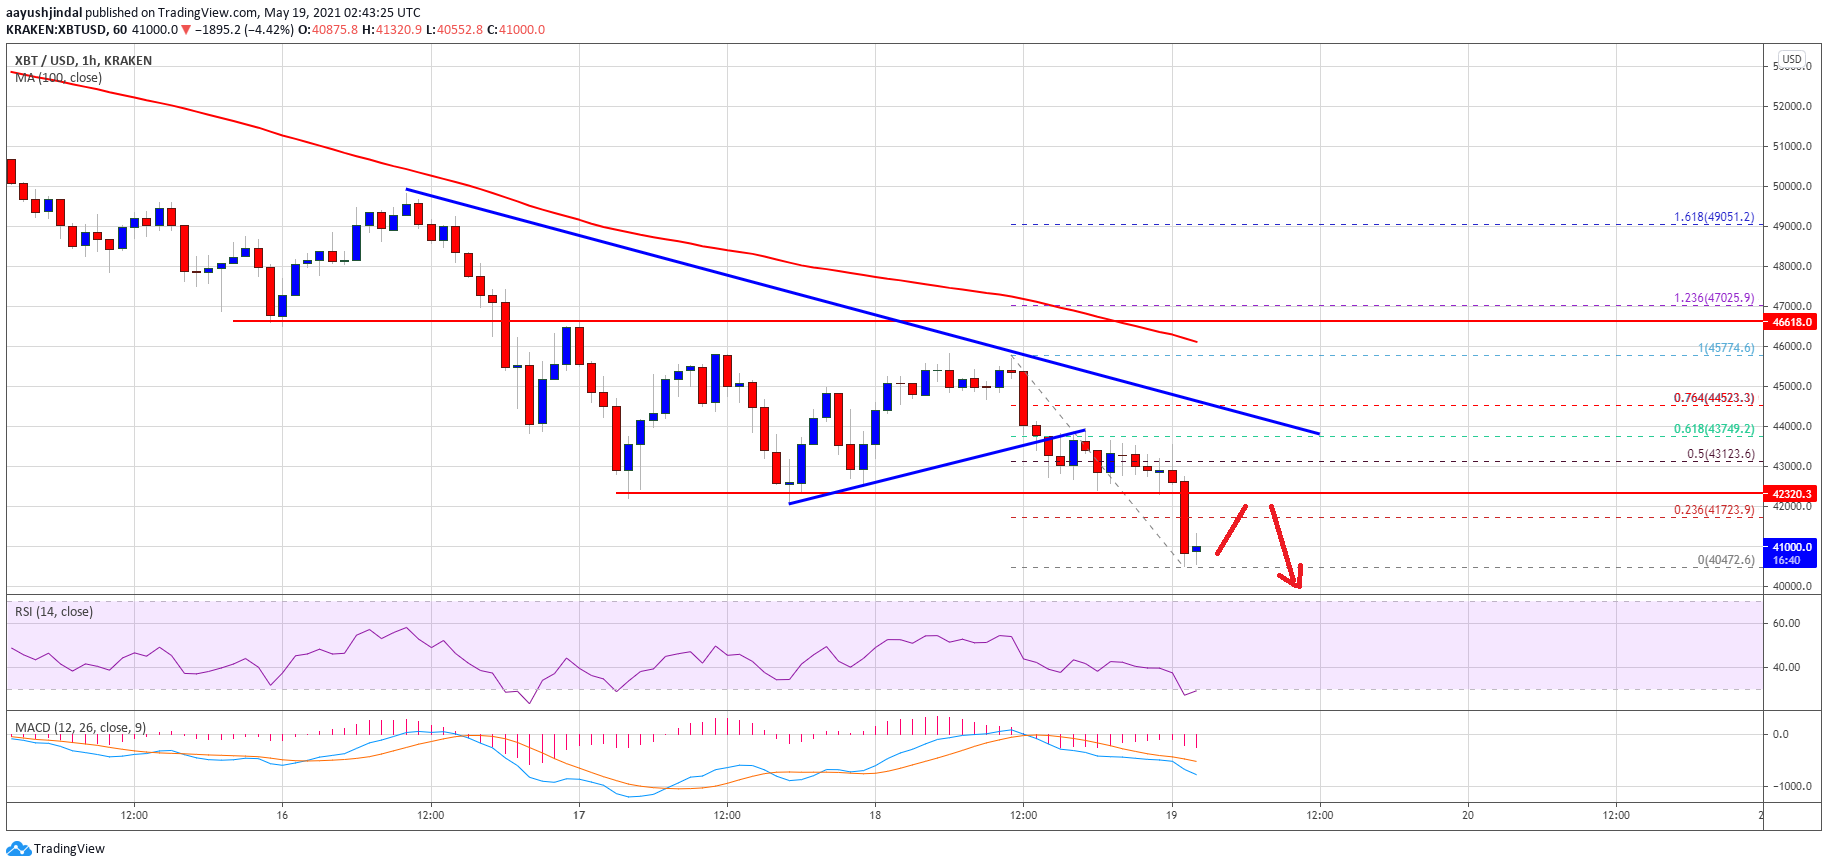 TA: Bitcoin Breaks Key Support, Here’s Why BTC Could Dive Below $40K